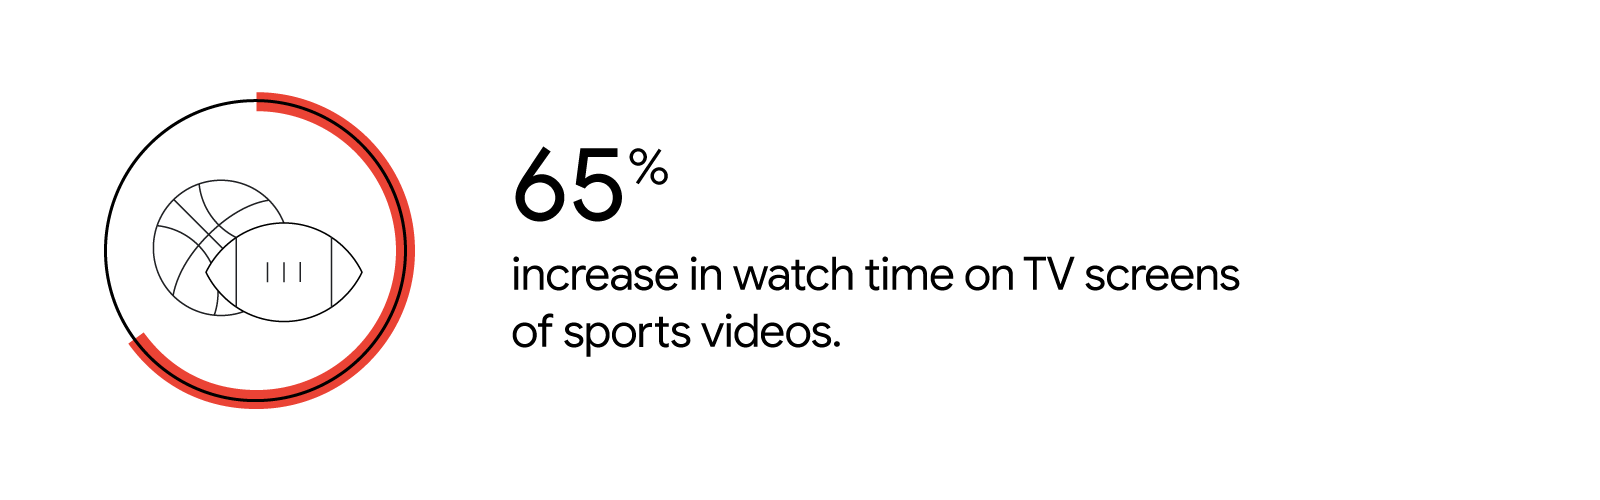 People are watching YouTube on TV screens